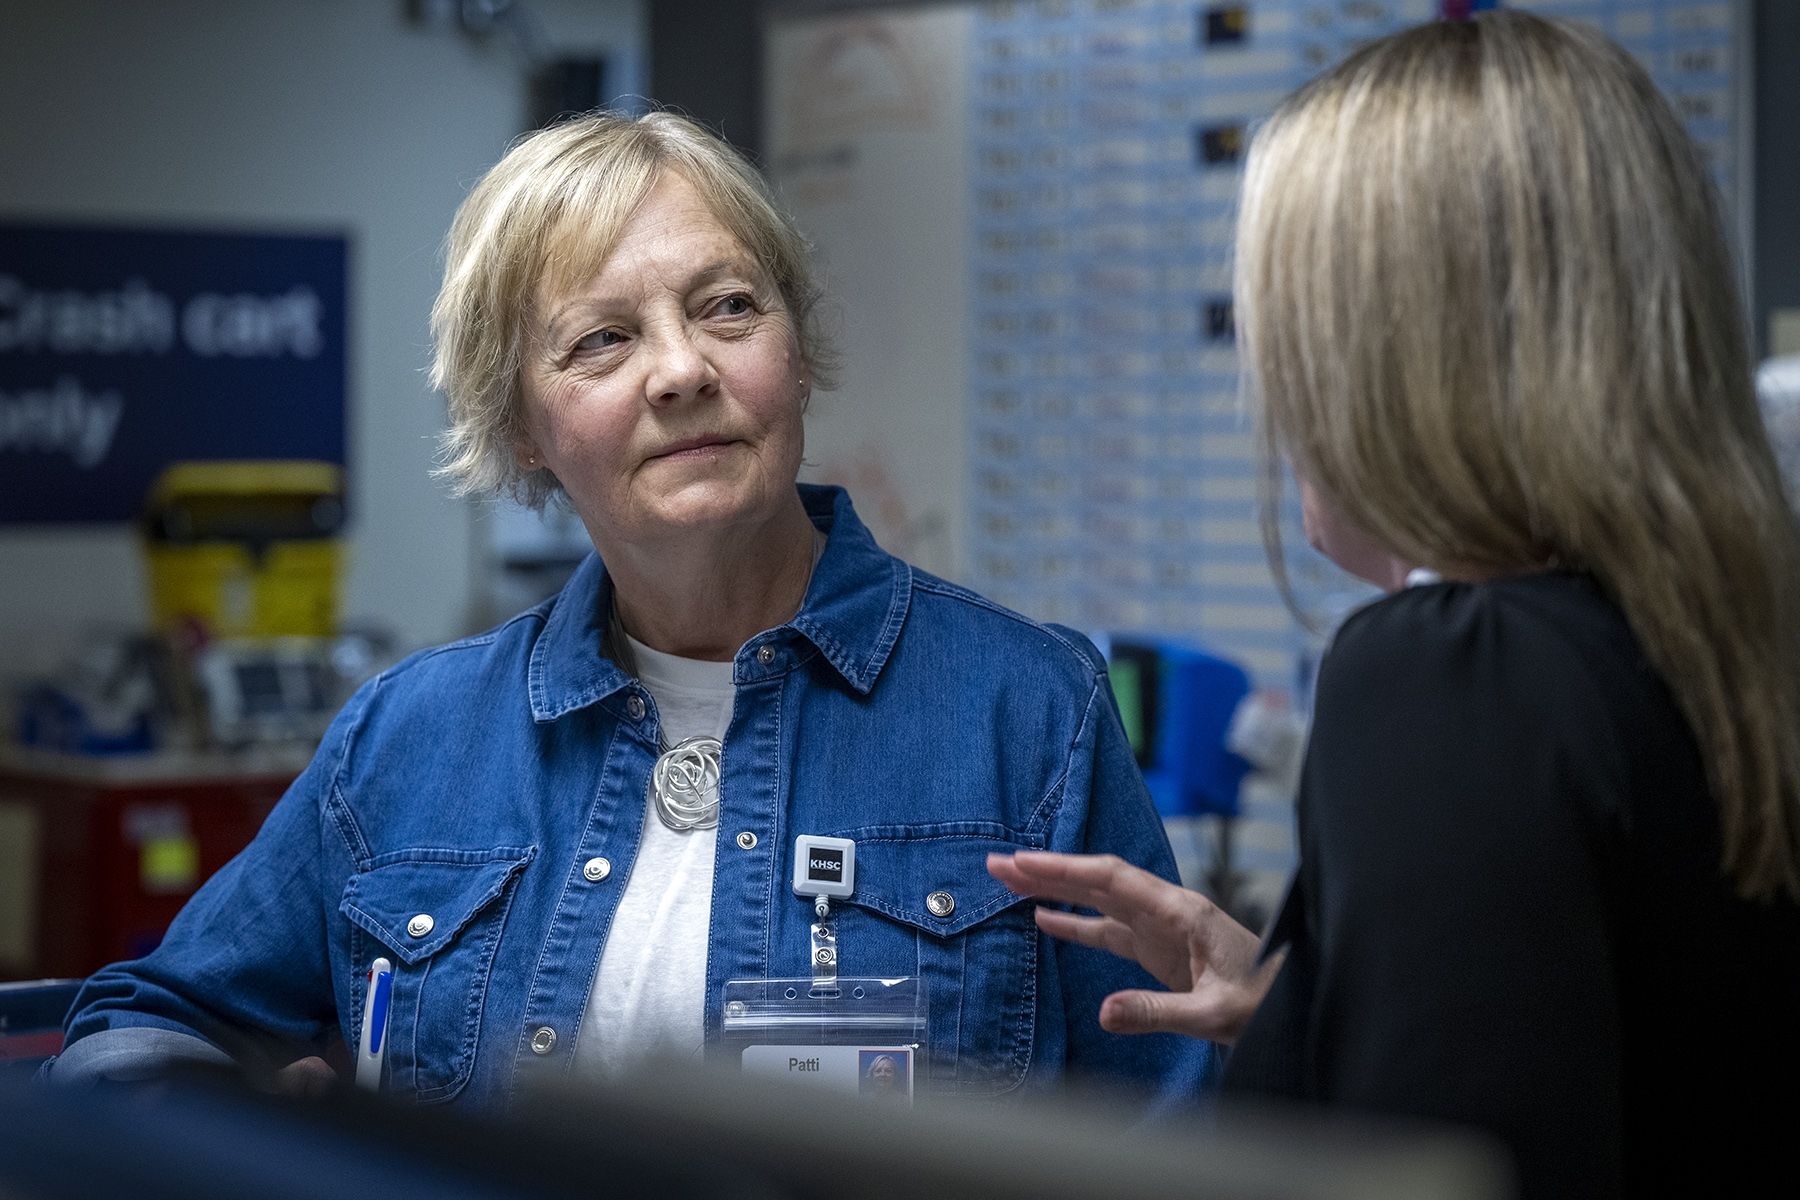 Patti Cox is pictured leaning against a care desk on a patient care unit, listening as a member of the care team speaks to her. Cox has blue eyes and light blonde hair styled in a pixie cut. She’s wearing a blue denim blouse on top of a white t-shirt. The staff member has their back to the camera, while Cox is facing the camera.